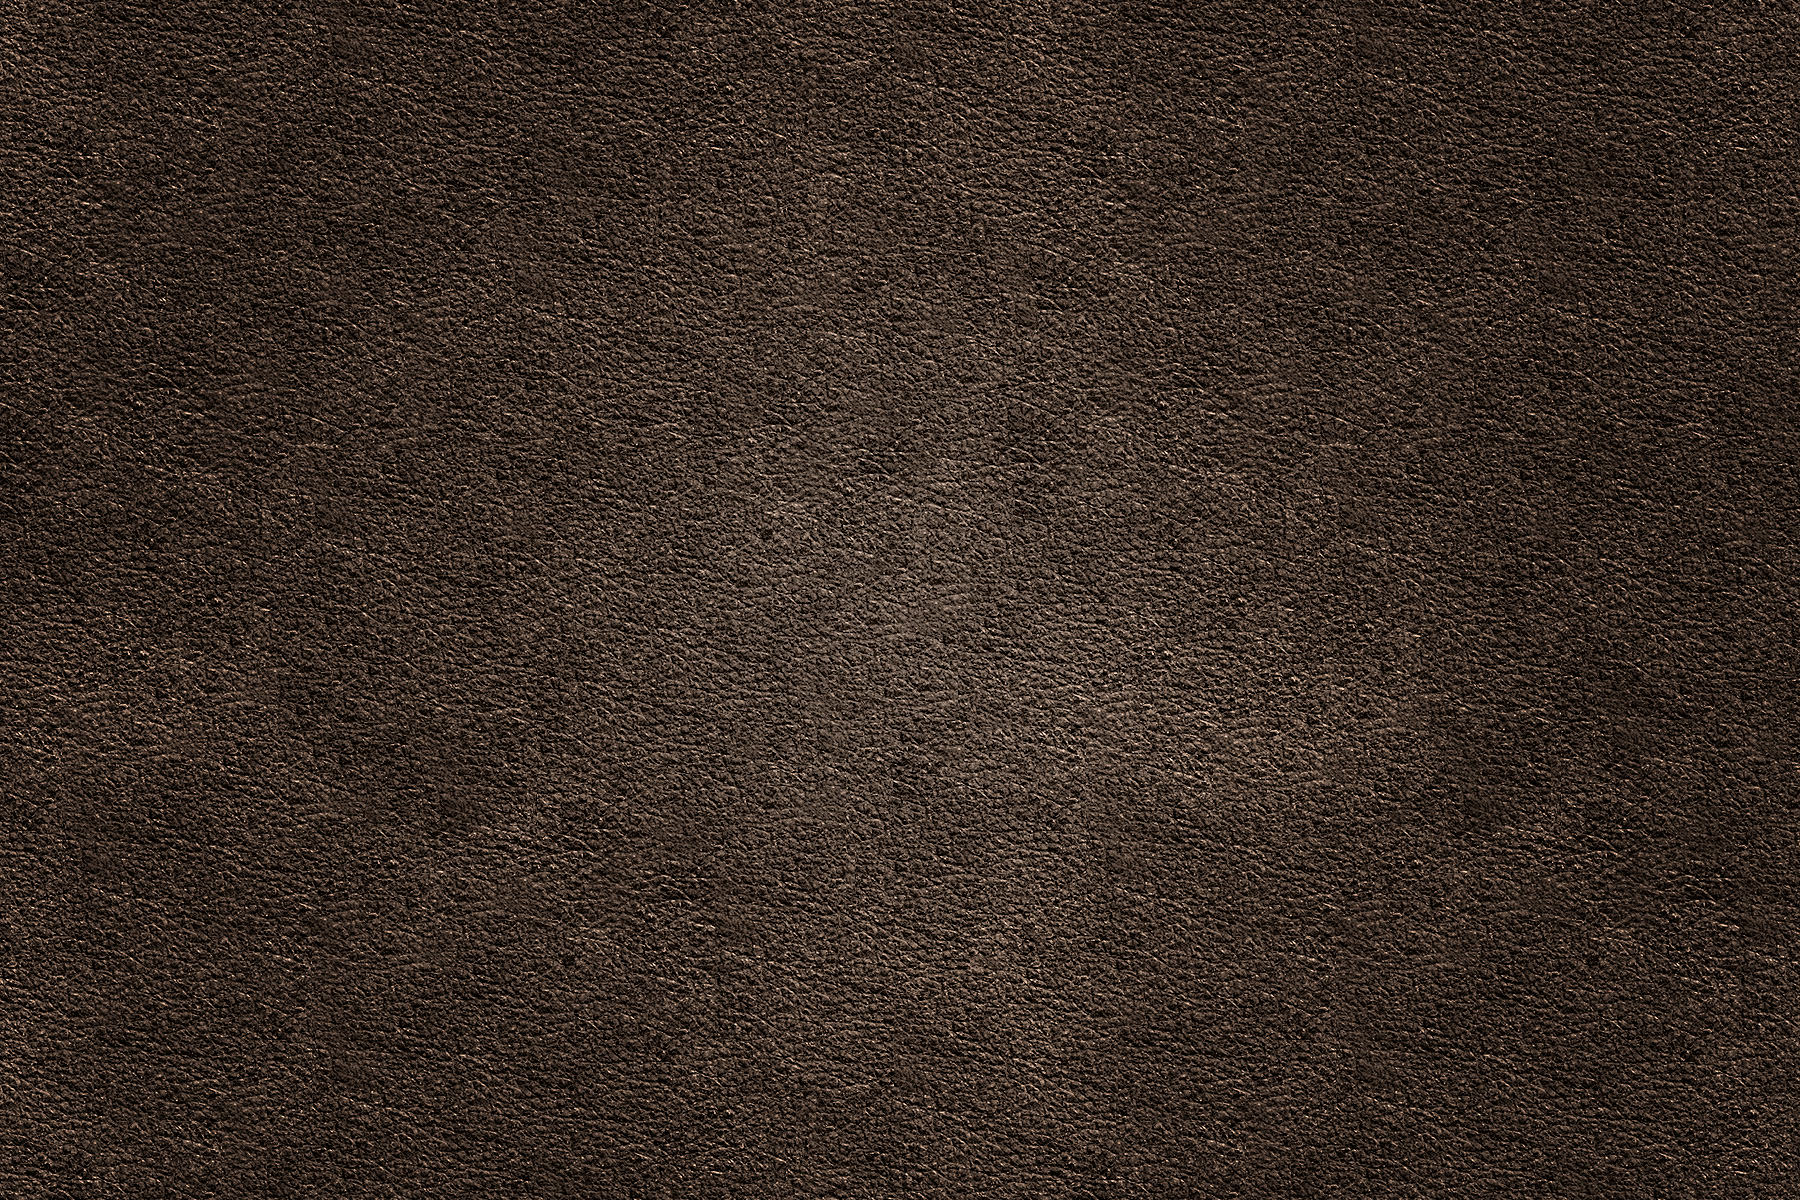 Download 10 High Res Distressed Leather Textures